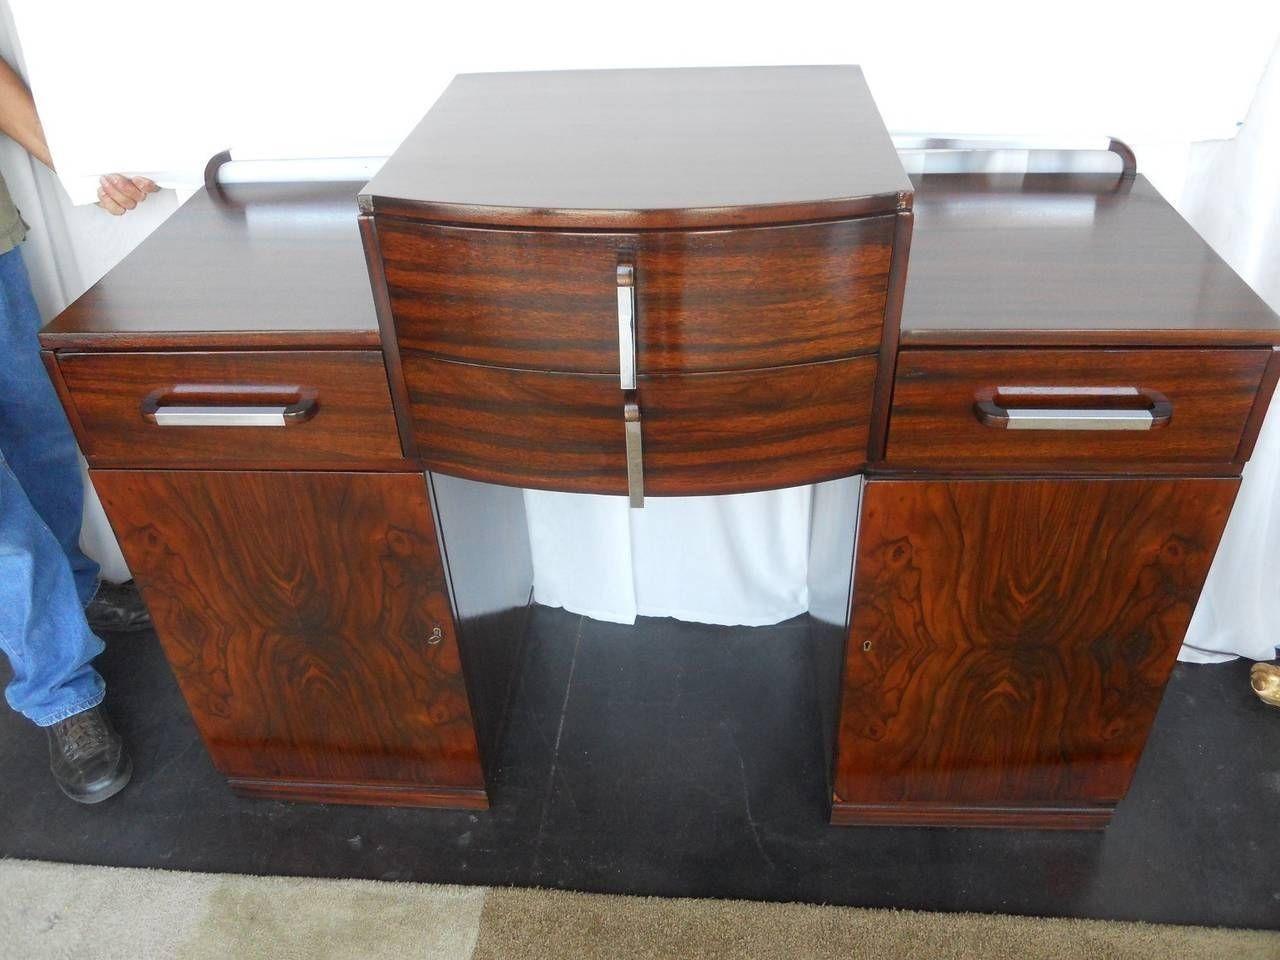 Versatile Art Deco console or commode with drawers.
 
Made of African burl walnut and African mahogany.